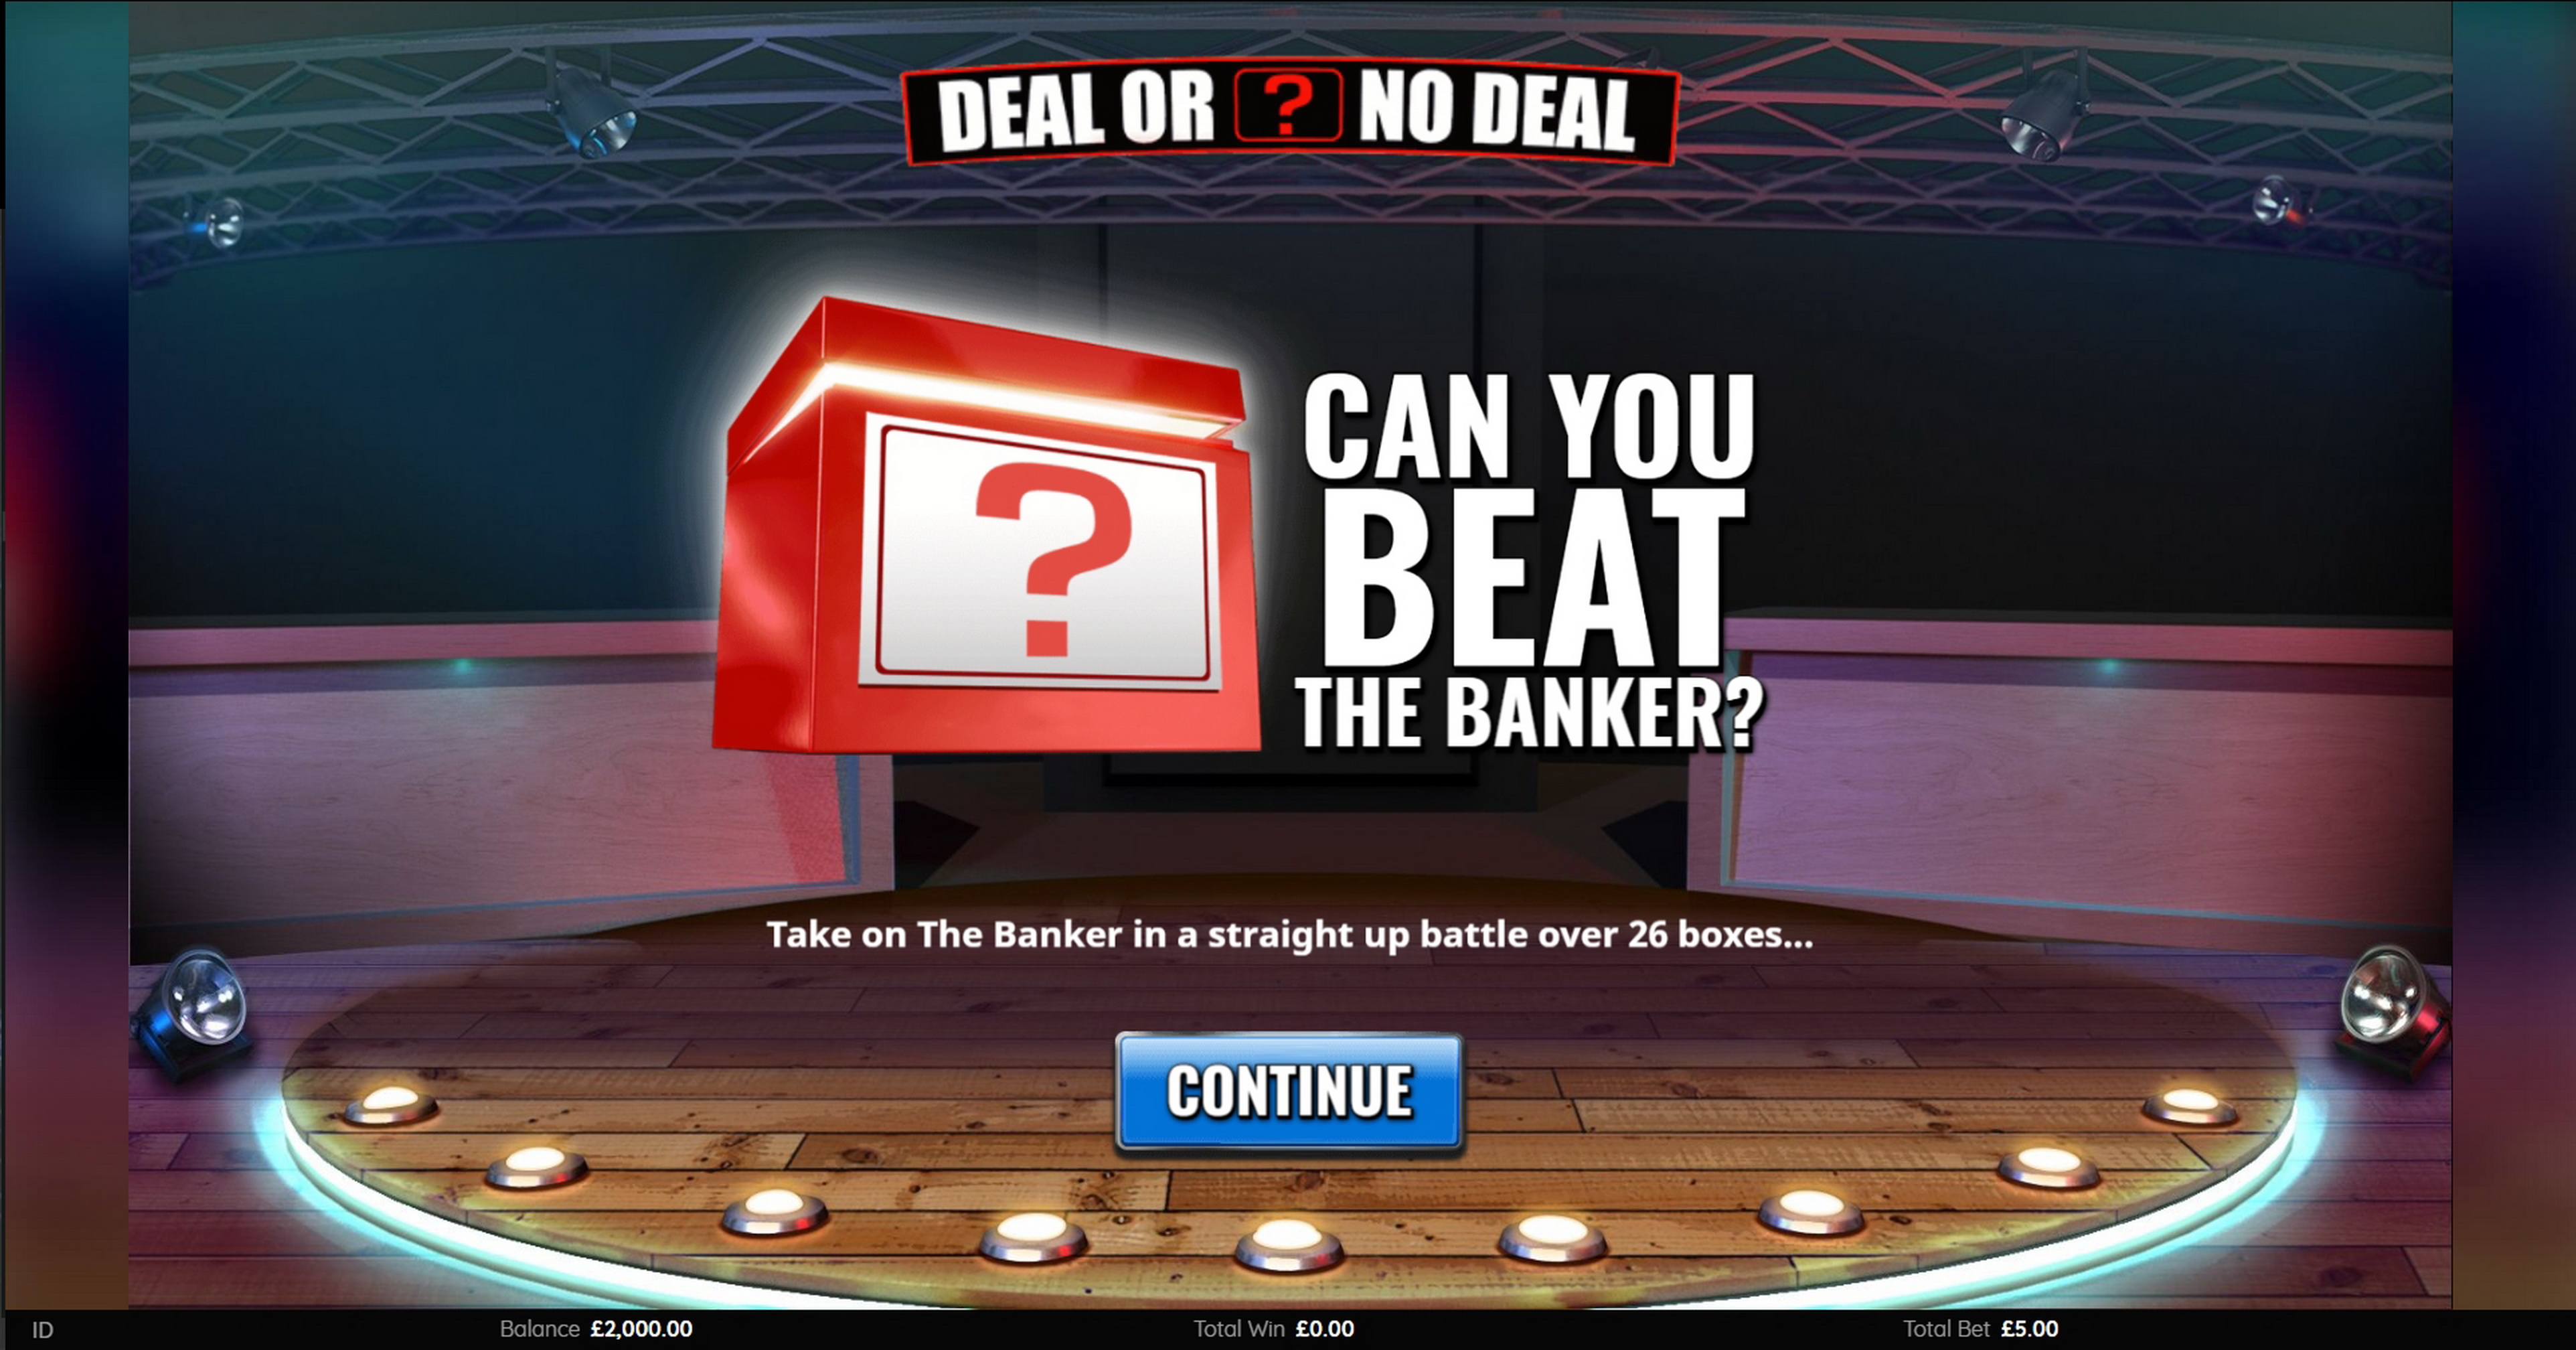 Play Deal Or No Deal Free Casino Slot Game by Endemol Games